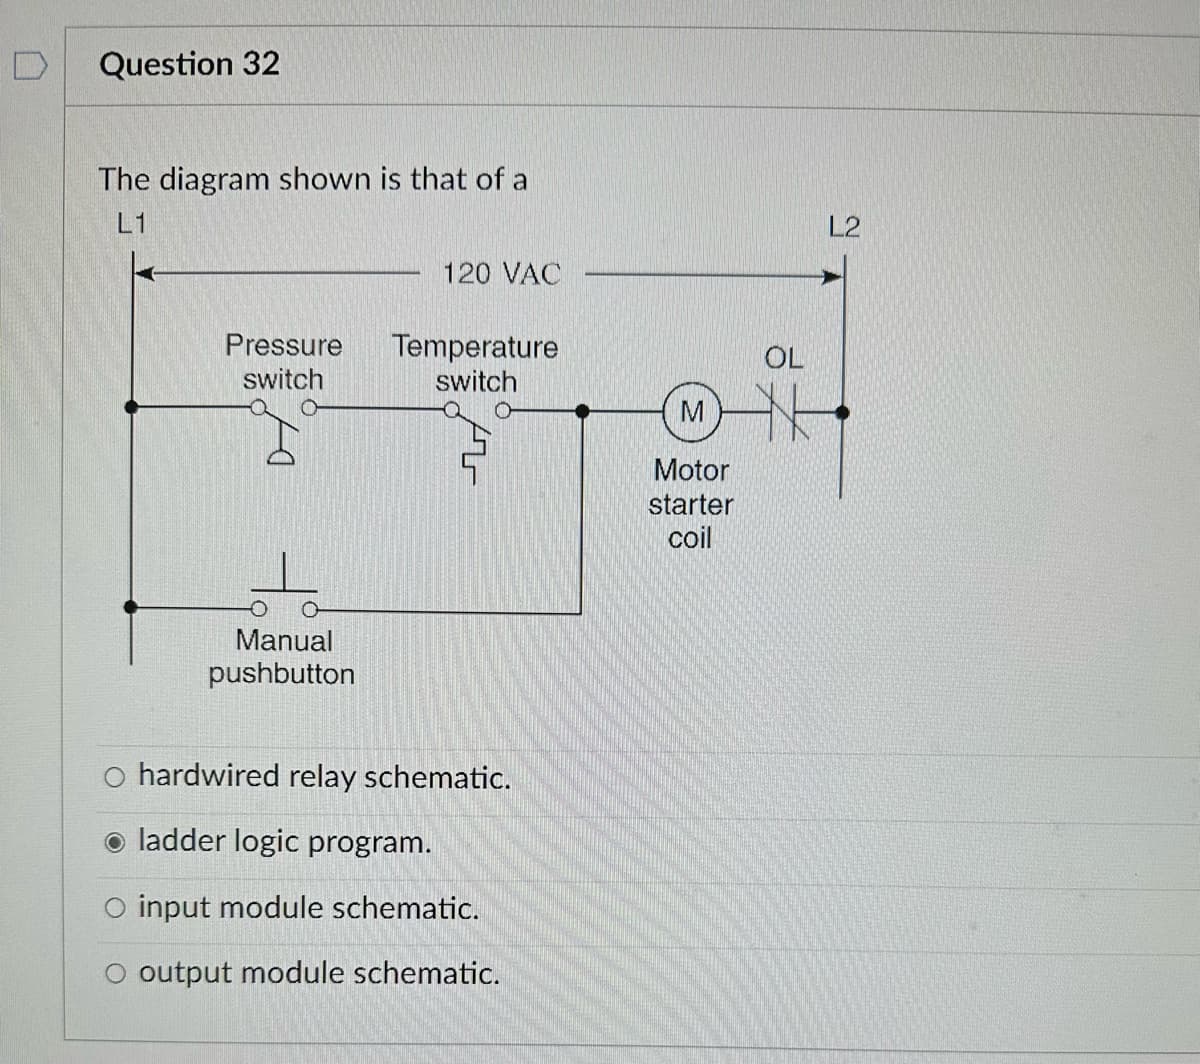 D
Question 32
The diagram shown is that of a
L1
Pressure
switch
Manual
pushbutton
120 VAC
Temperature
switch
O hardwired relay schematic.
ladder logic program.
O input module schematic.
O output module schematic.
M
Motor
starter
coil
OL
L2